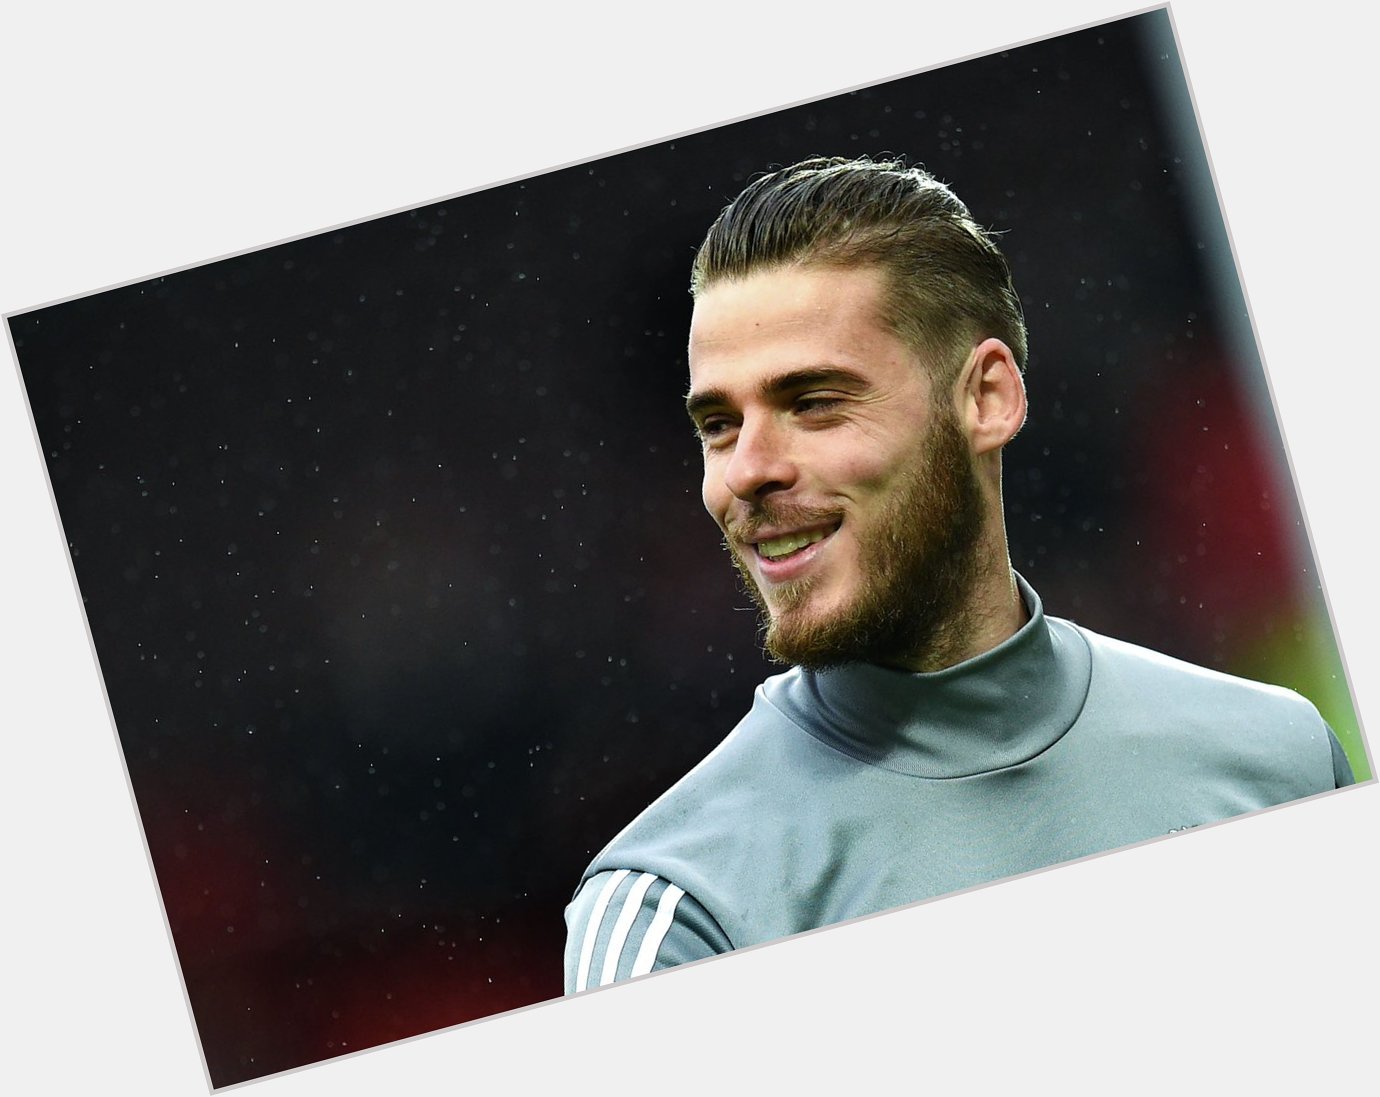 A VERY happy birthday to the world\s best goalkeeper, David de Gea, who turns 27 today! 